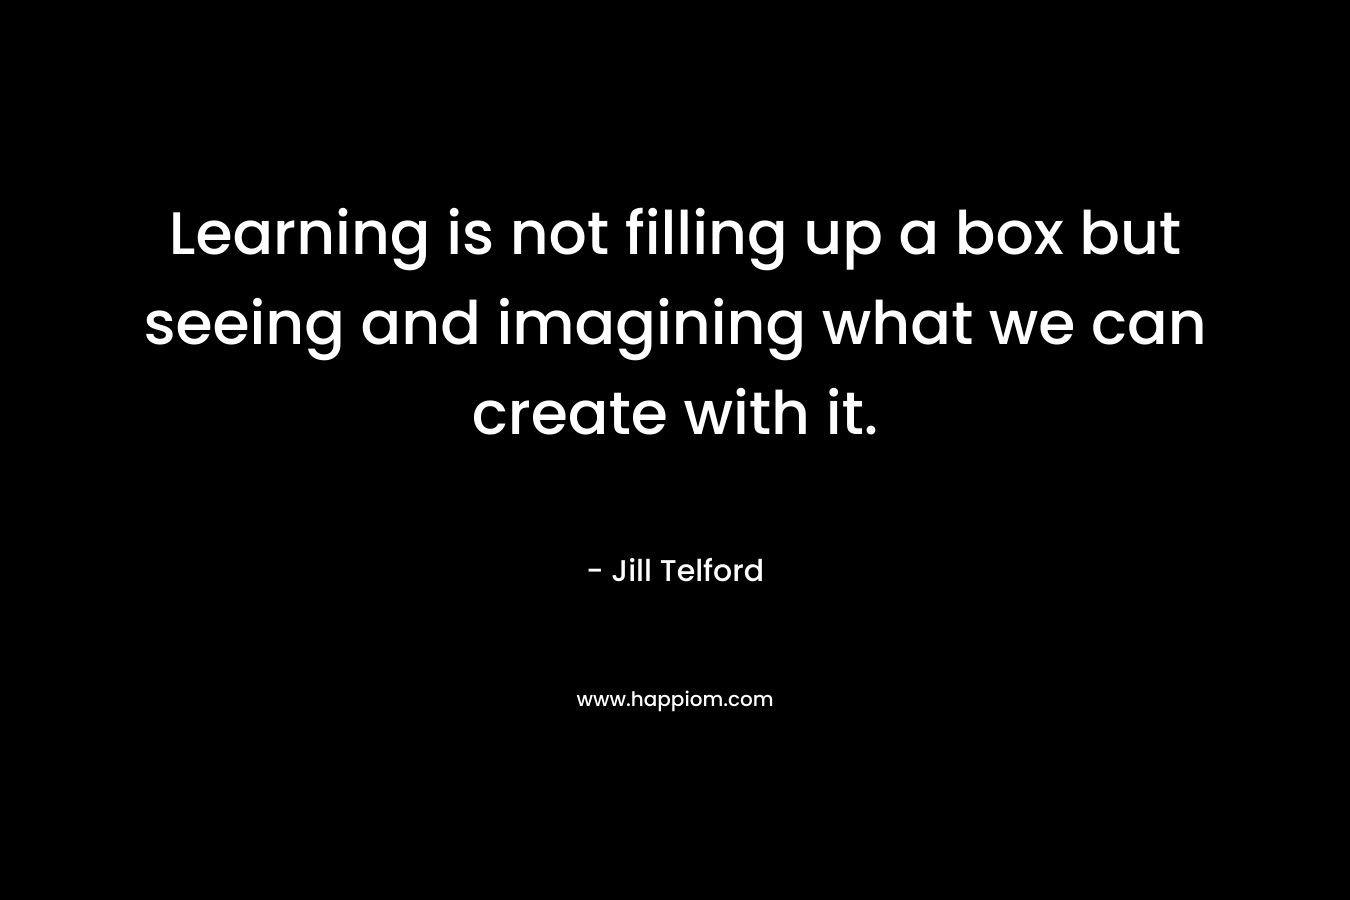 Learning is not filling up a box but seeing and imagining what we can create with it.